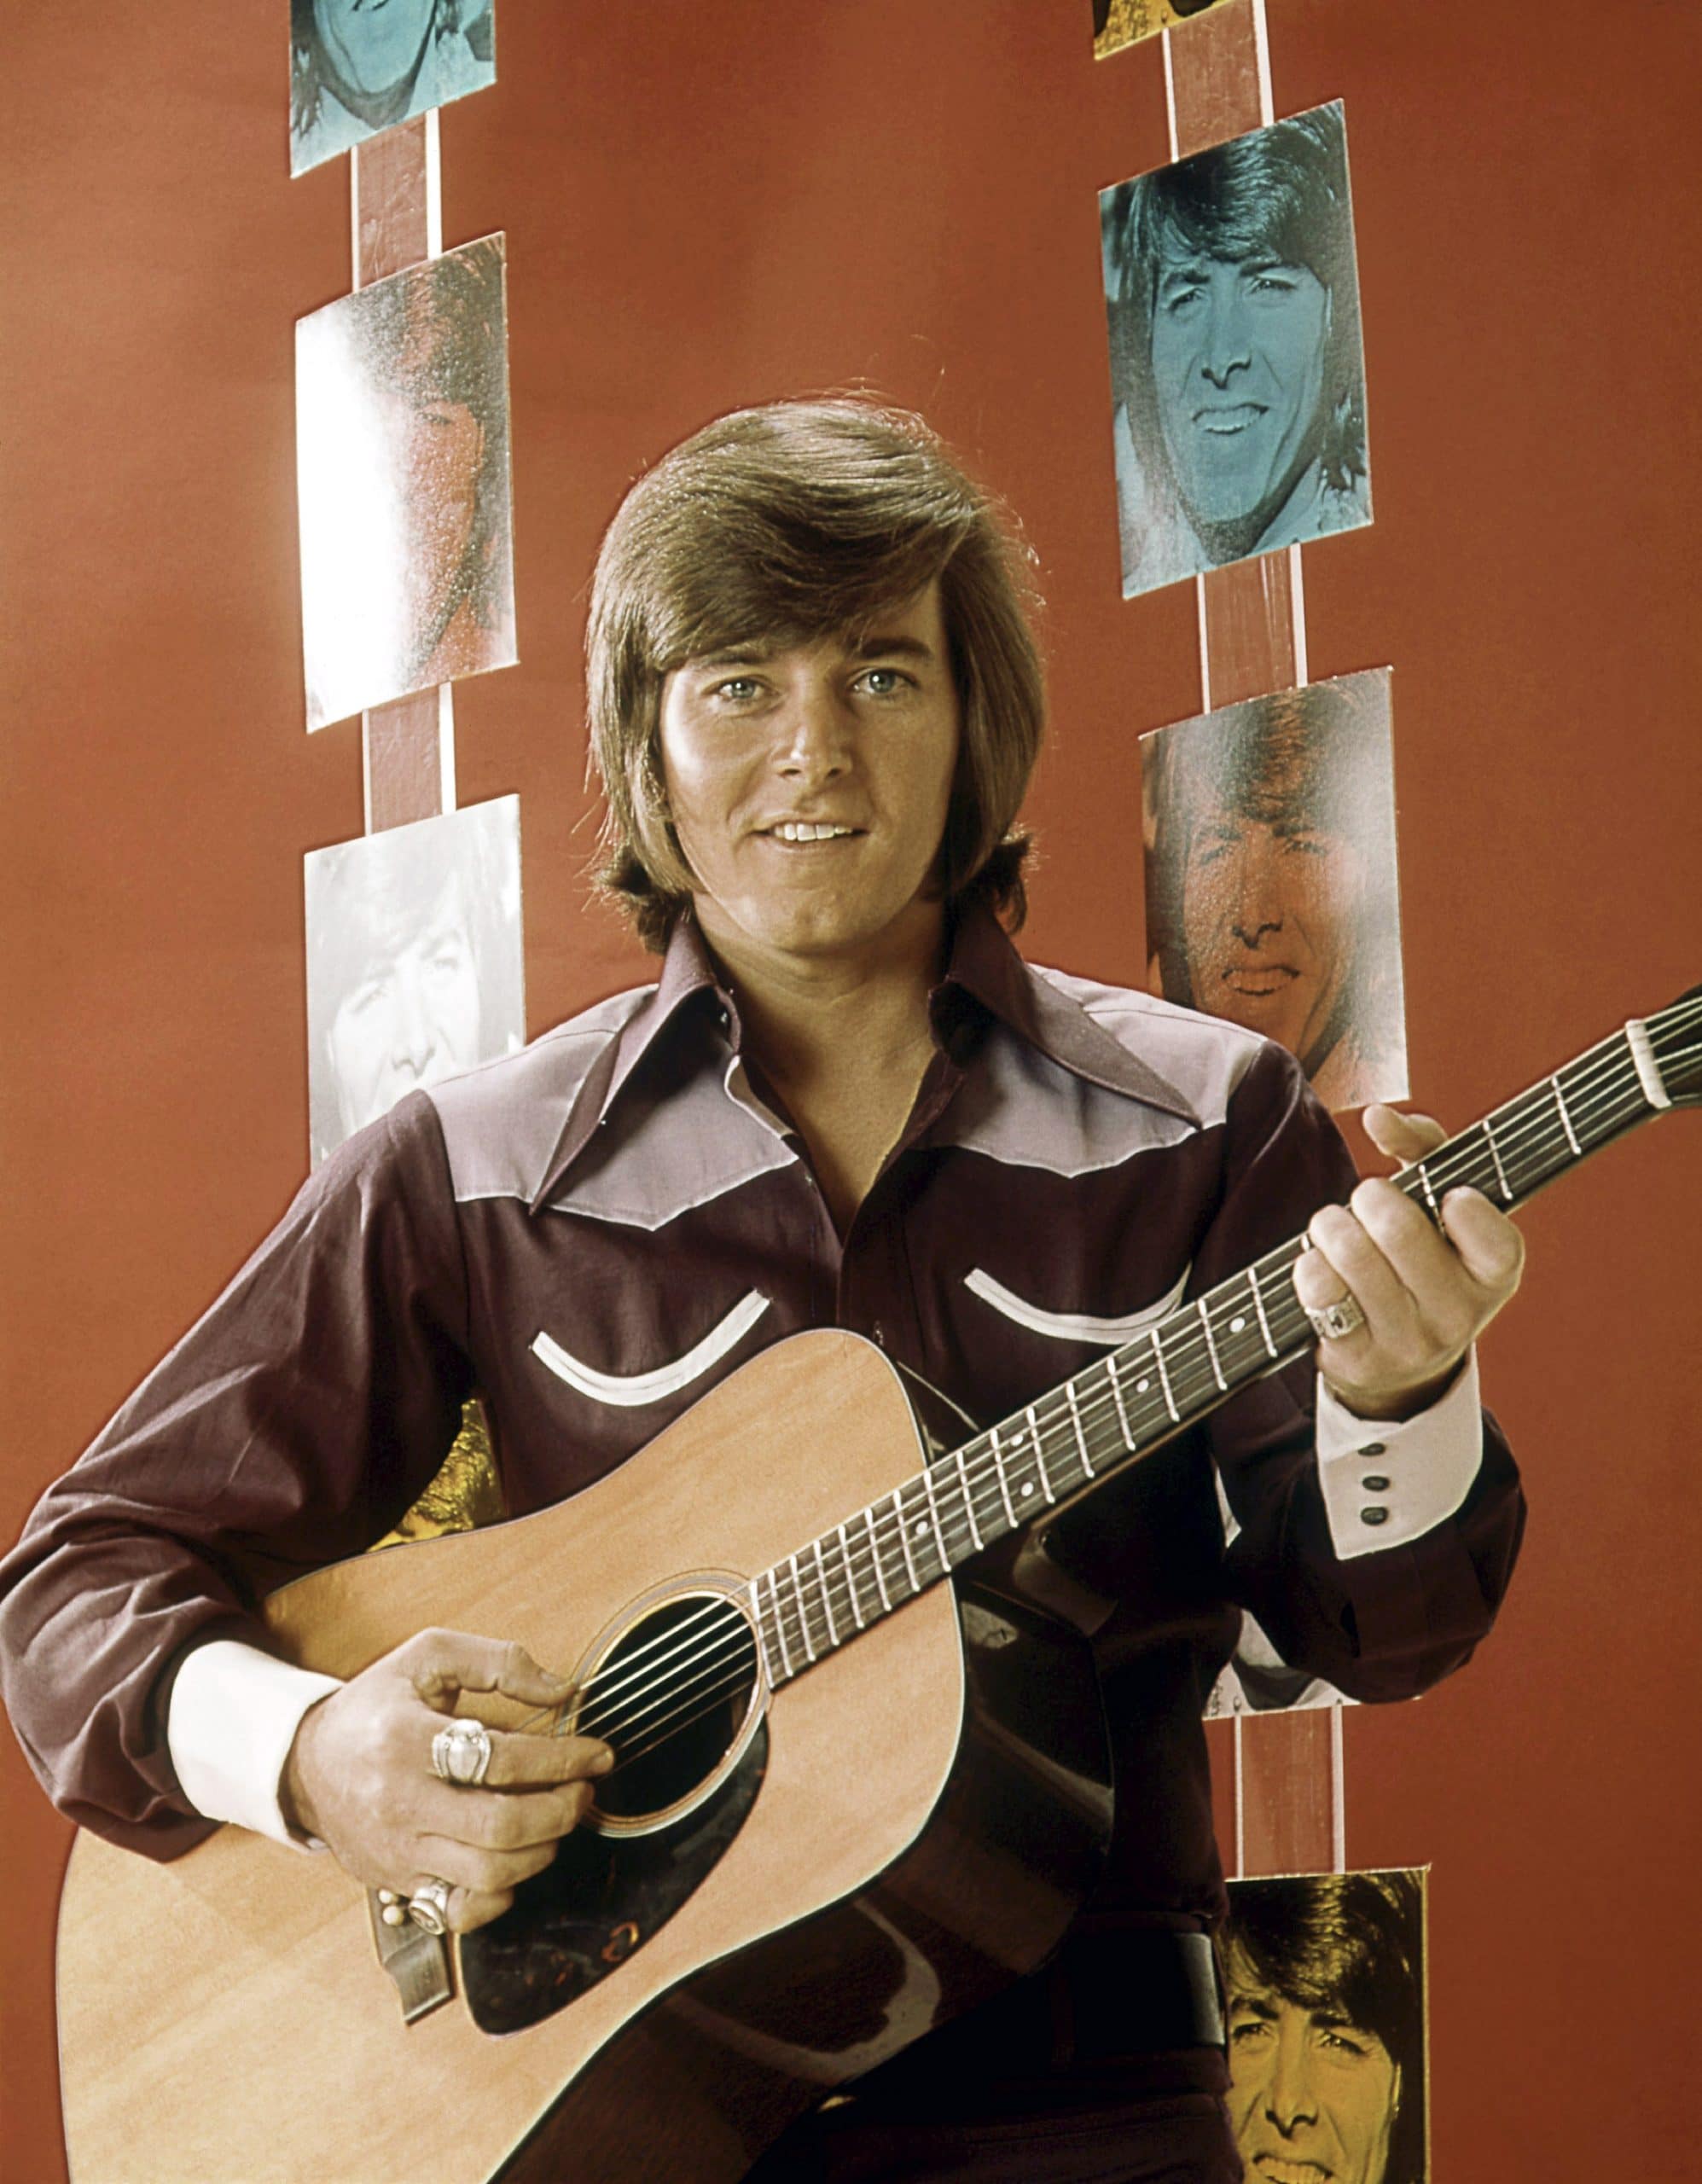 GETTING TOGETHER, Bobby Sherman, 1971-72